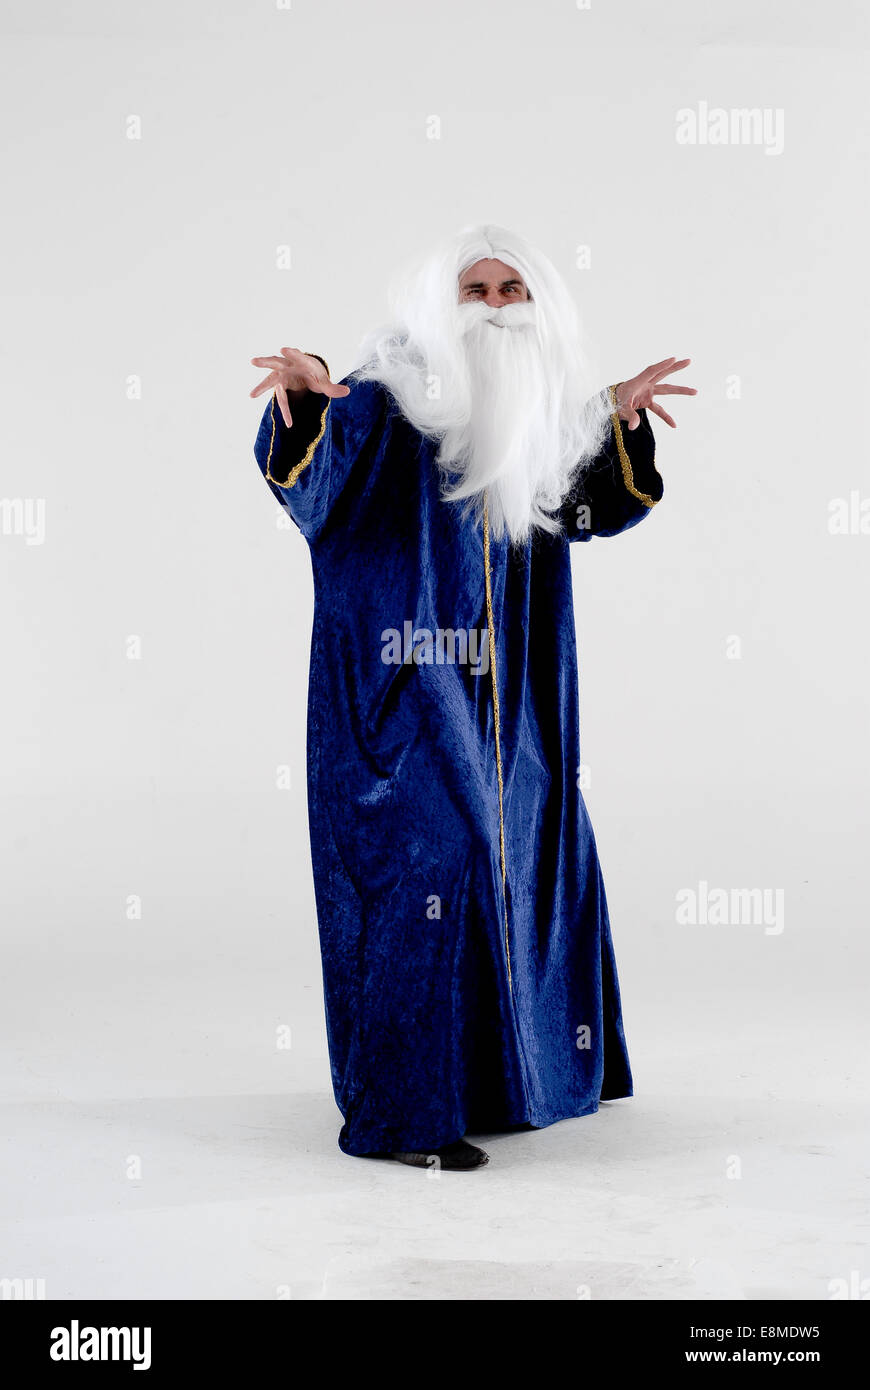 man in fancy dress comedy costume as a god like figure or a wizard with white long hair, beard and blue gown Stock Photo